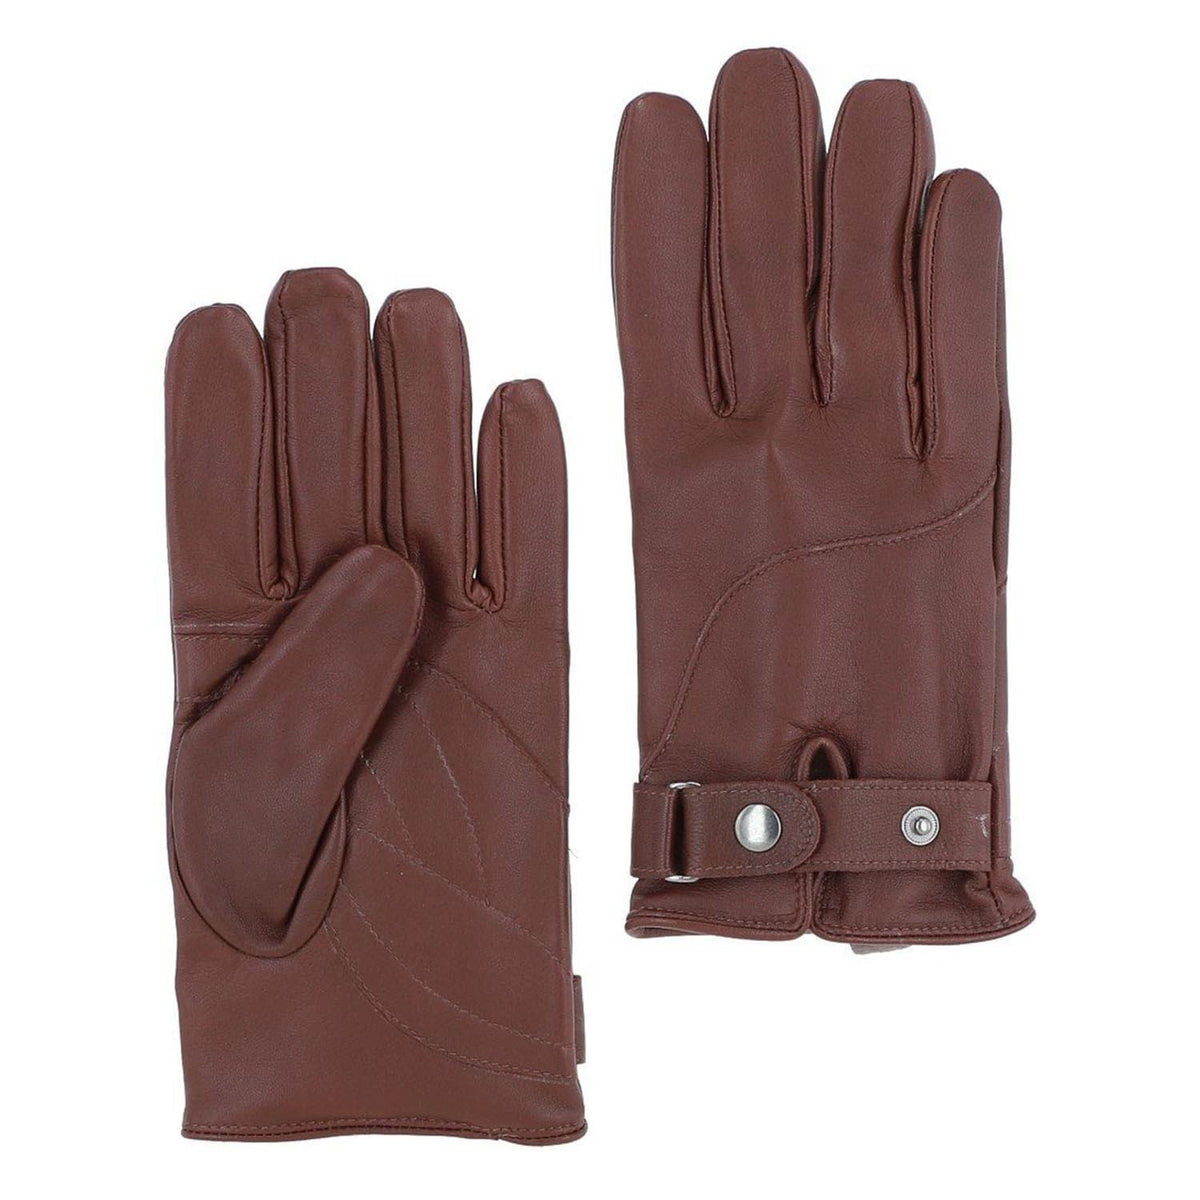 Men's Touch Screen Friendly Leather Gloves Tan